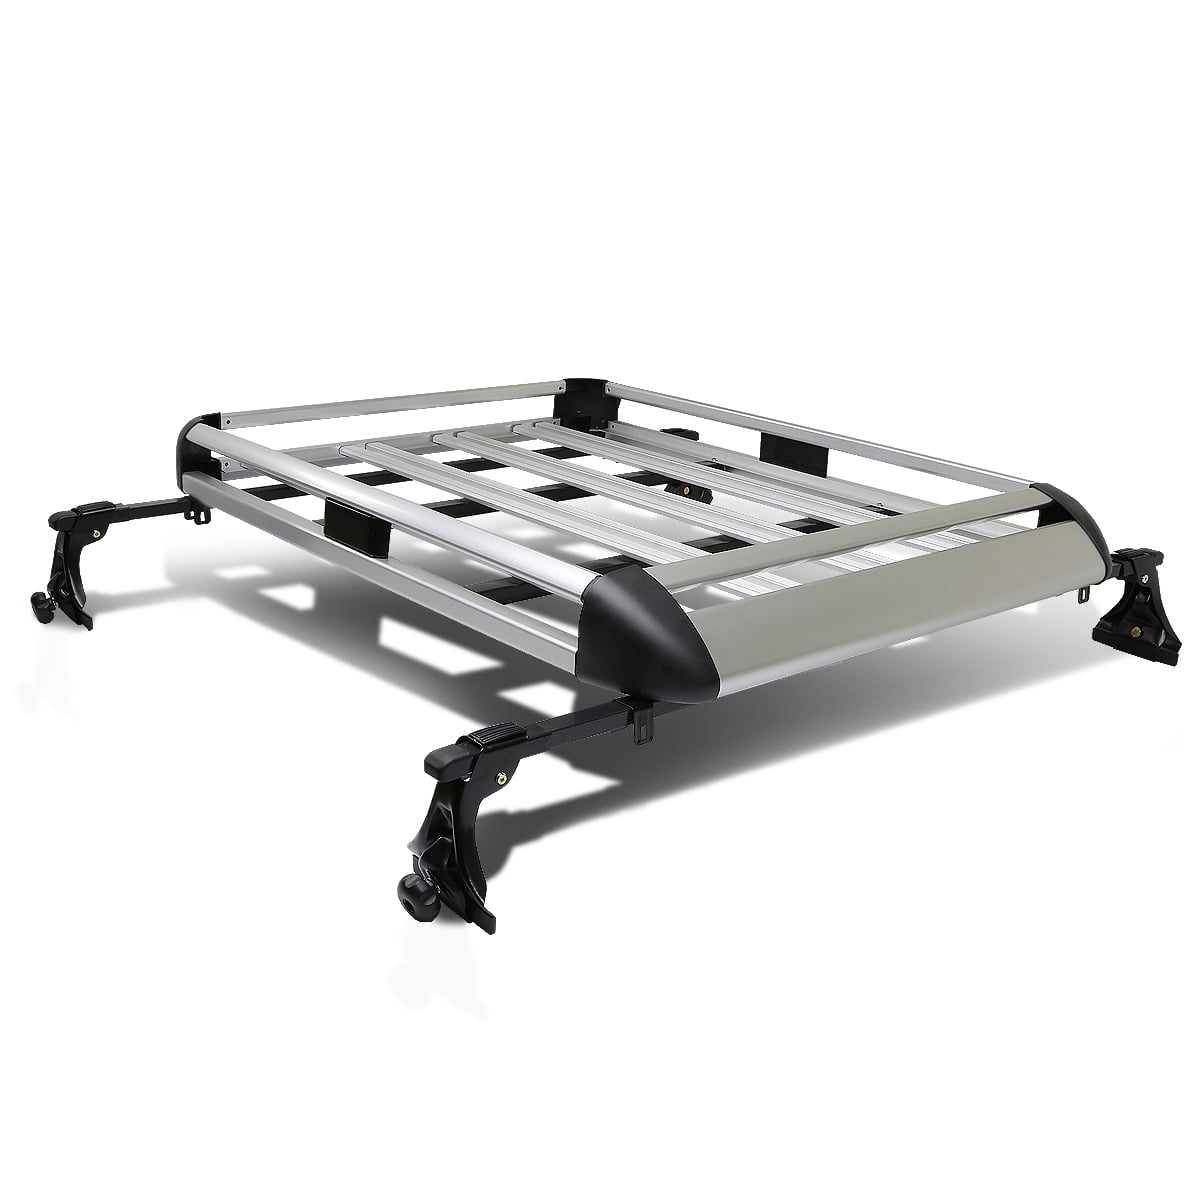 Car Roof Rack Covers